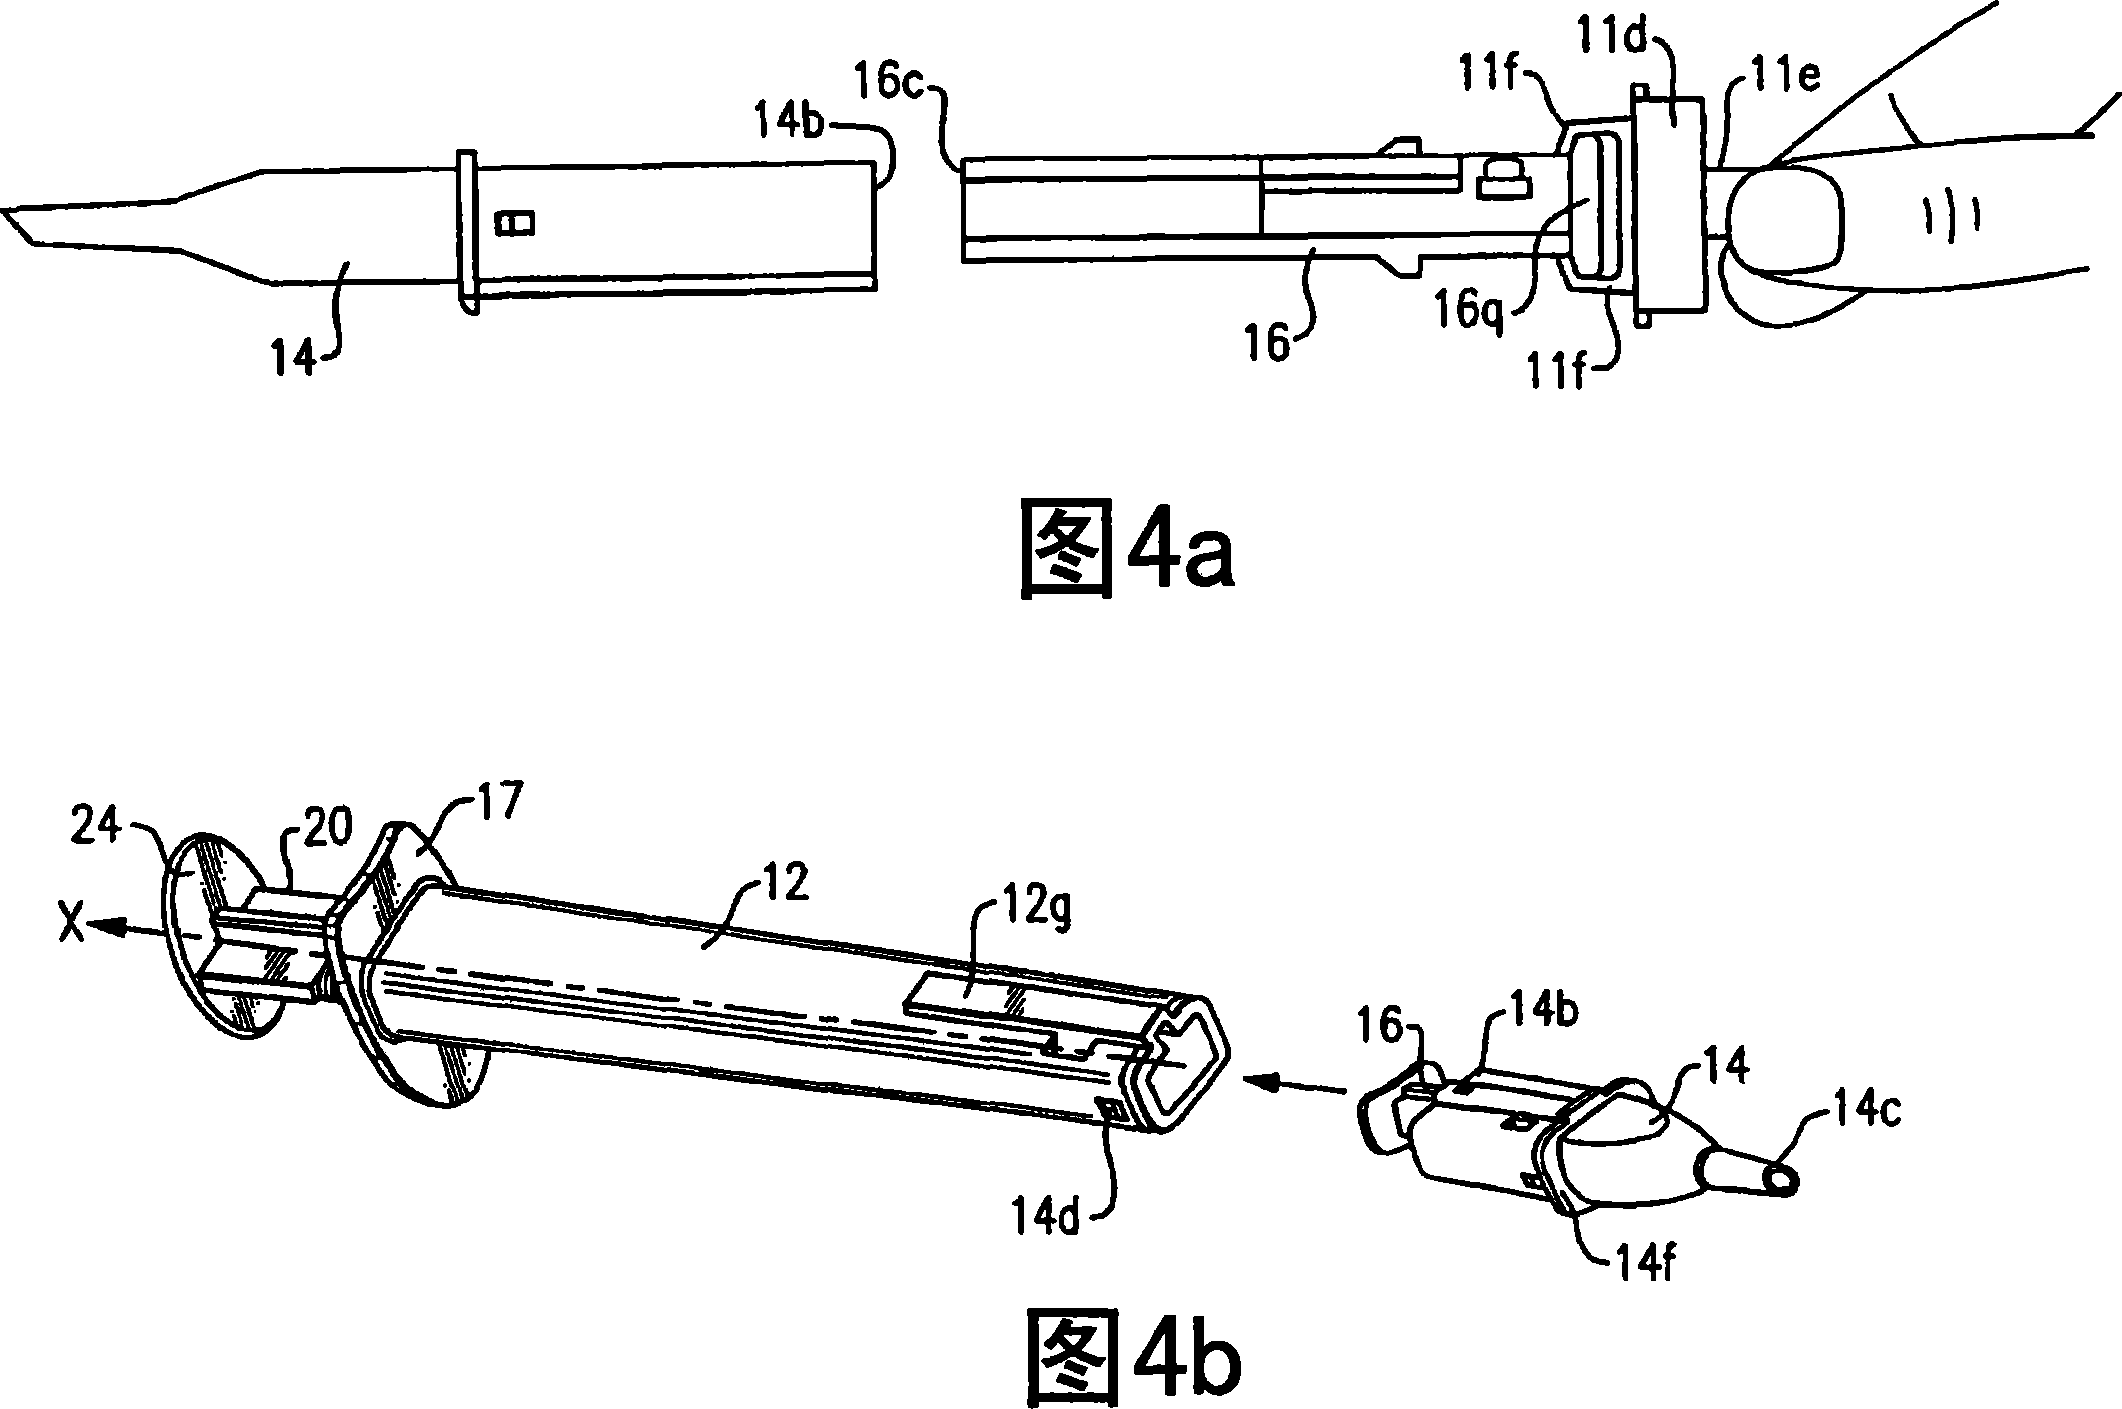 Preloaded iol injector and method